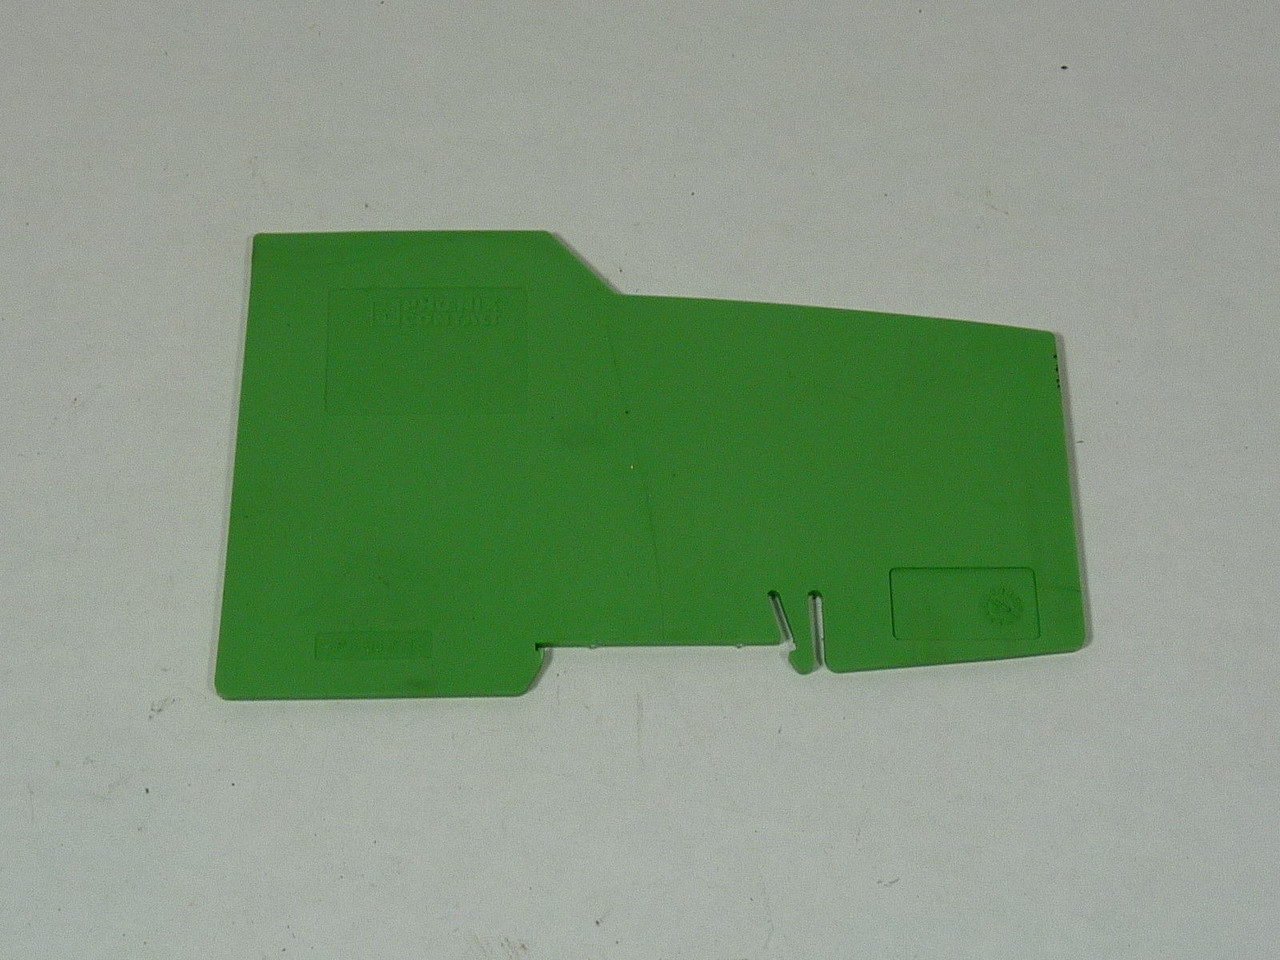 Phoenix Contact PA66-FR Cover Plate (Green) USED